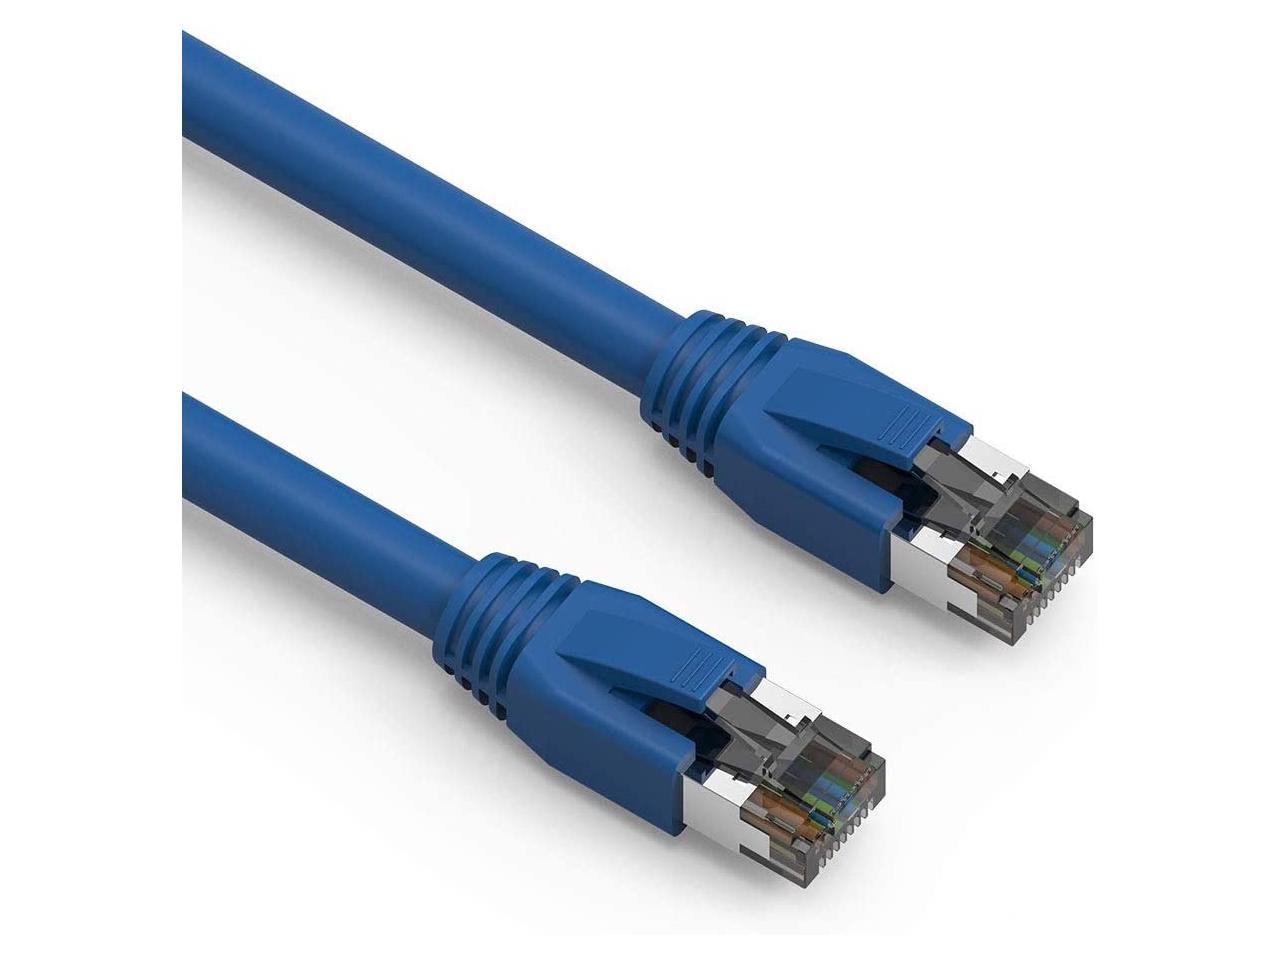 2000MHz 40 Gigabit/Sec High Speed LAN Internet/Patch Cable CABLECHOICE Cat8 SFTP Ethernet Cable 0.5 Feet - Orange 24AWG Network Cable with Gold Plated RJ45 Snagless/Molded/Booted Connector 